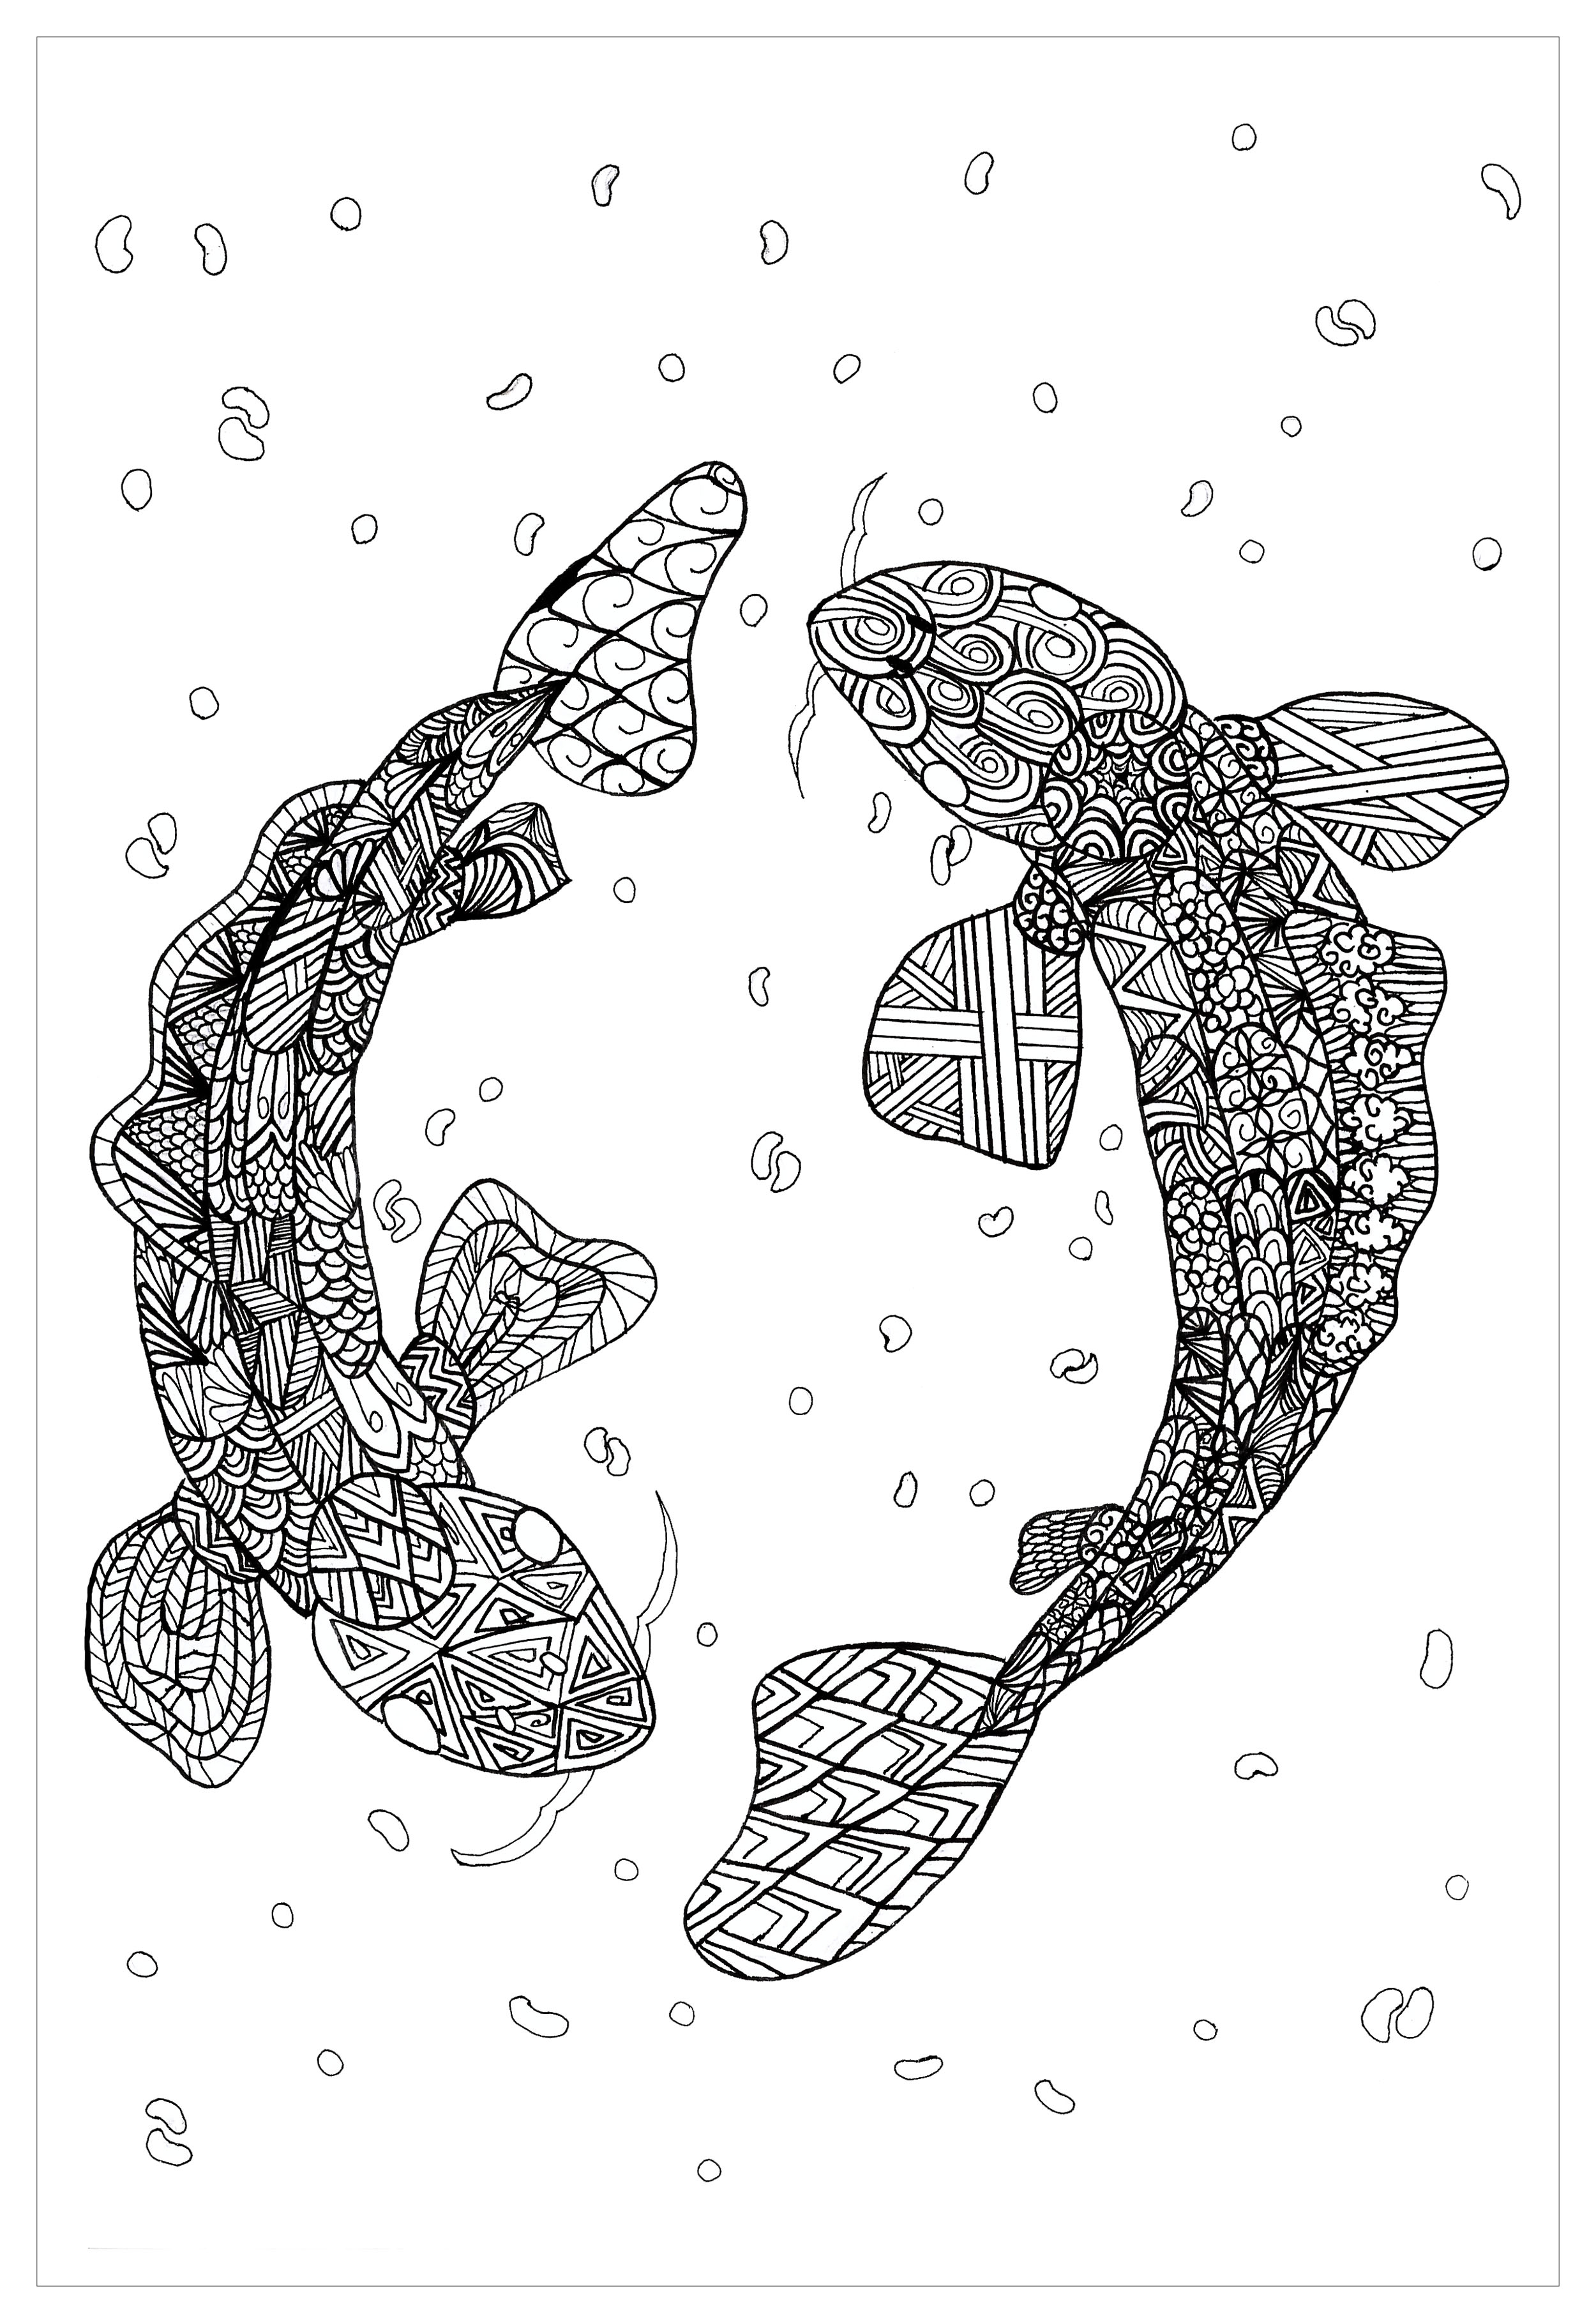 Coloring page of two Koi Carps in Zentangle style. These fishes are highly prized ornamental fish from Asia.